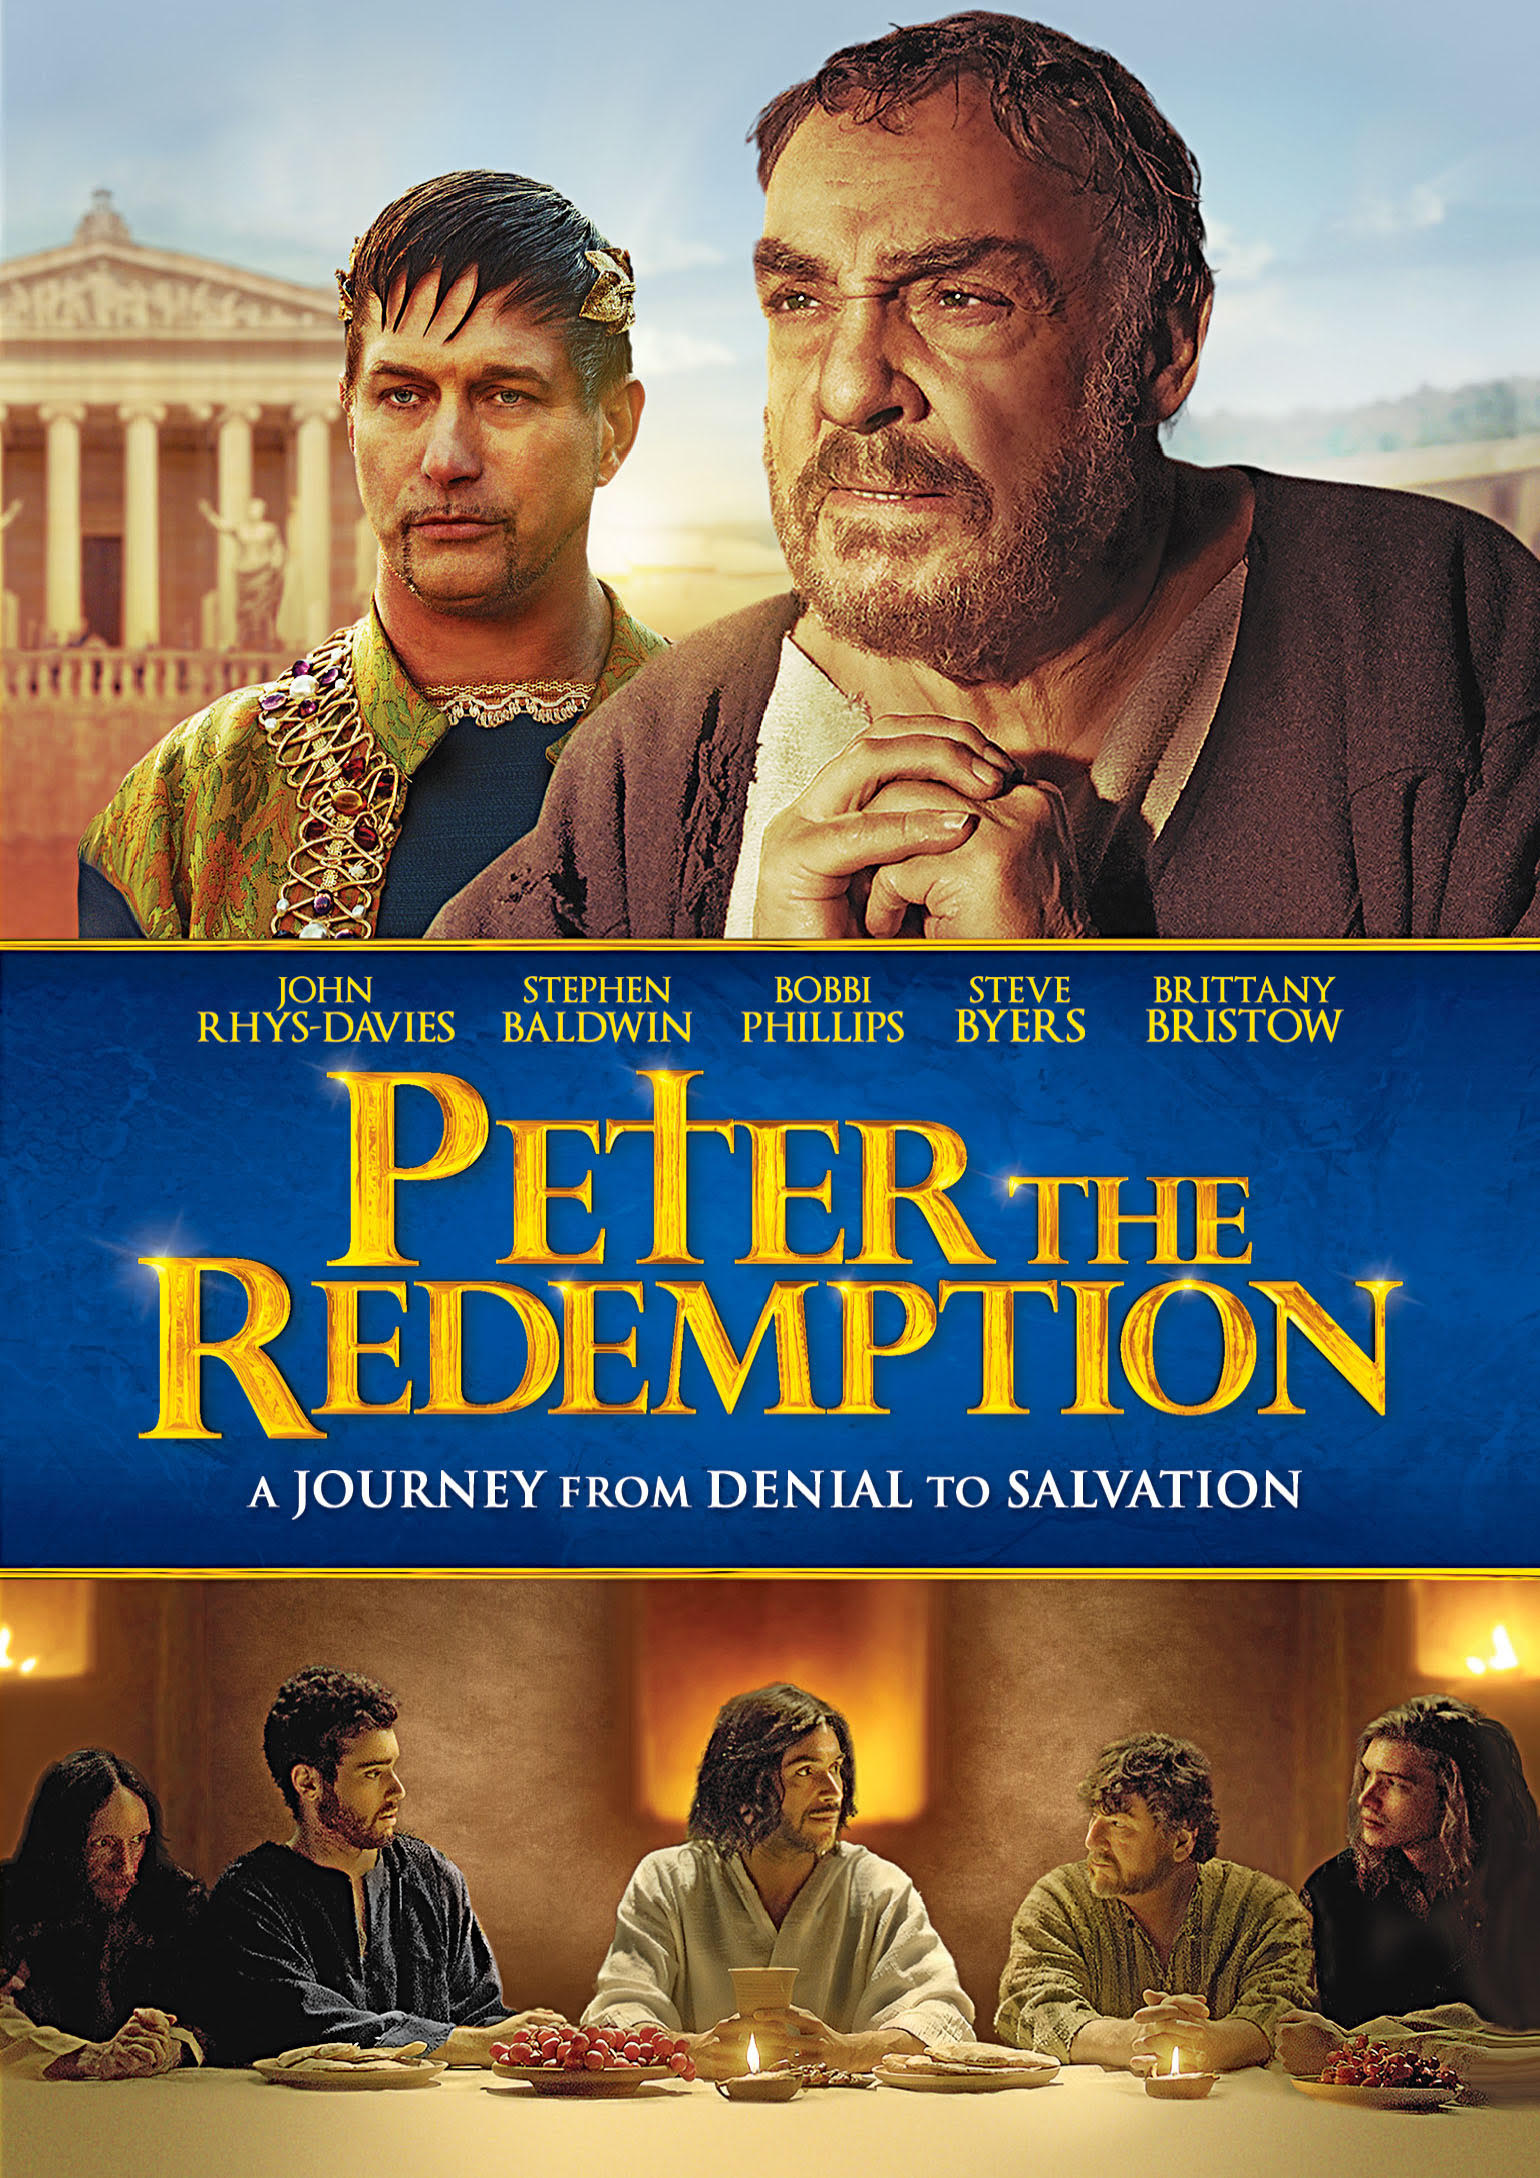 Interview: Leif and Brittany Bristow of “Peter the Redemption”